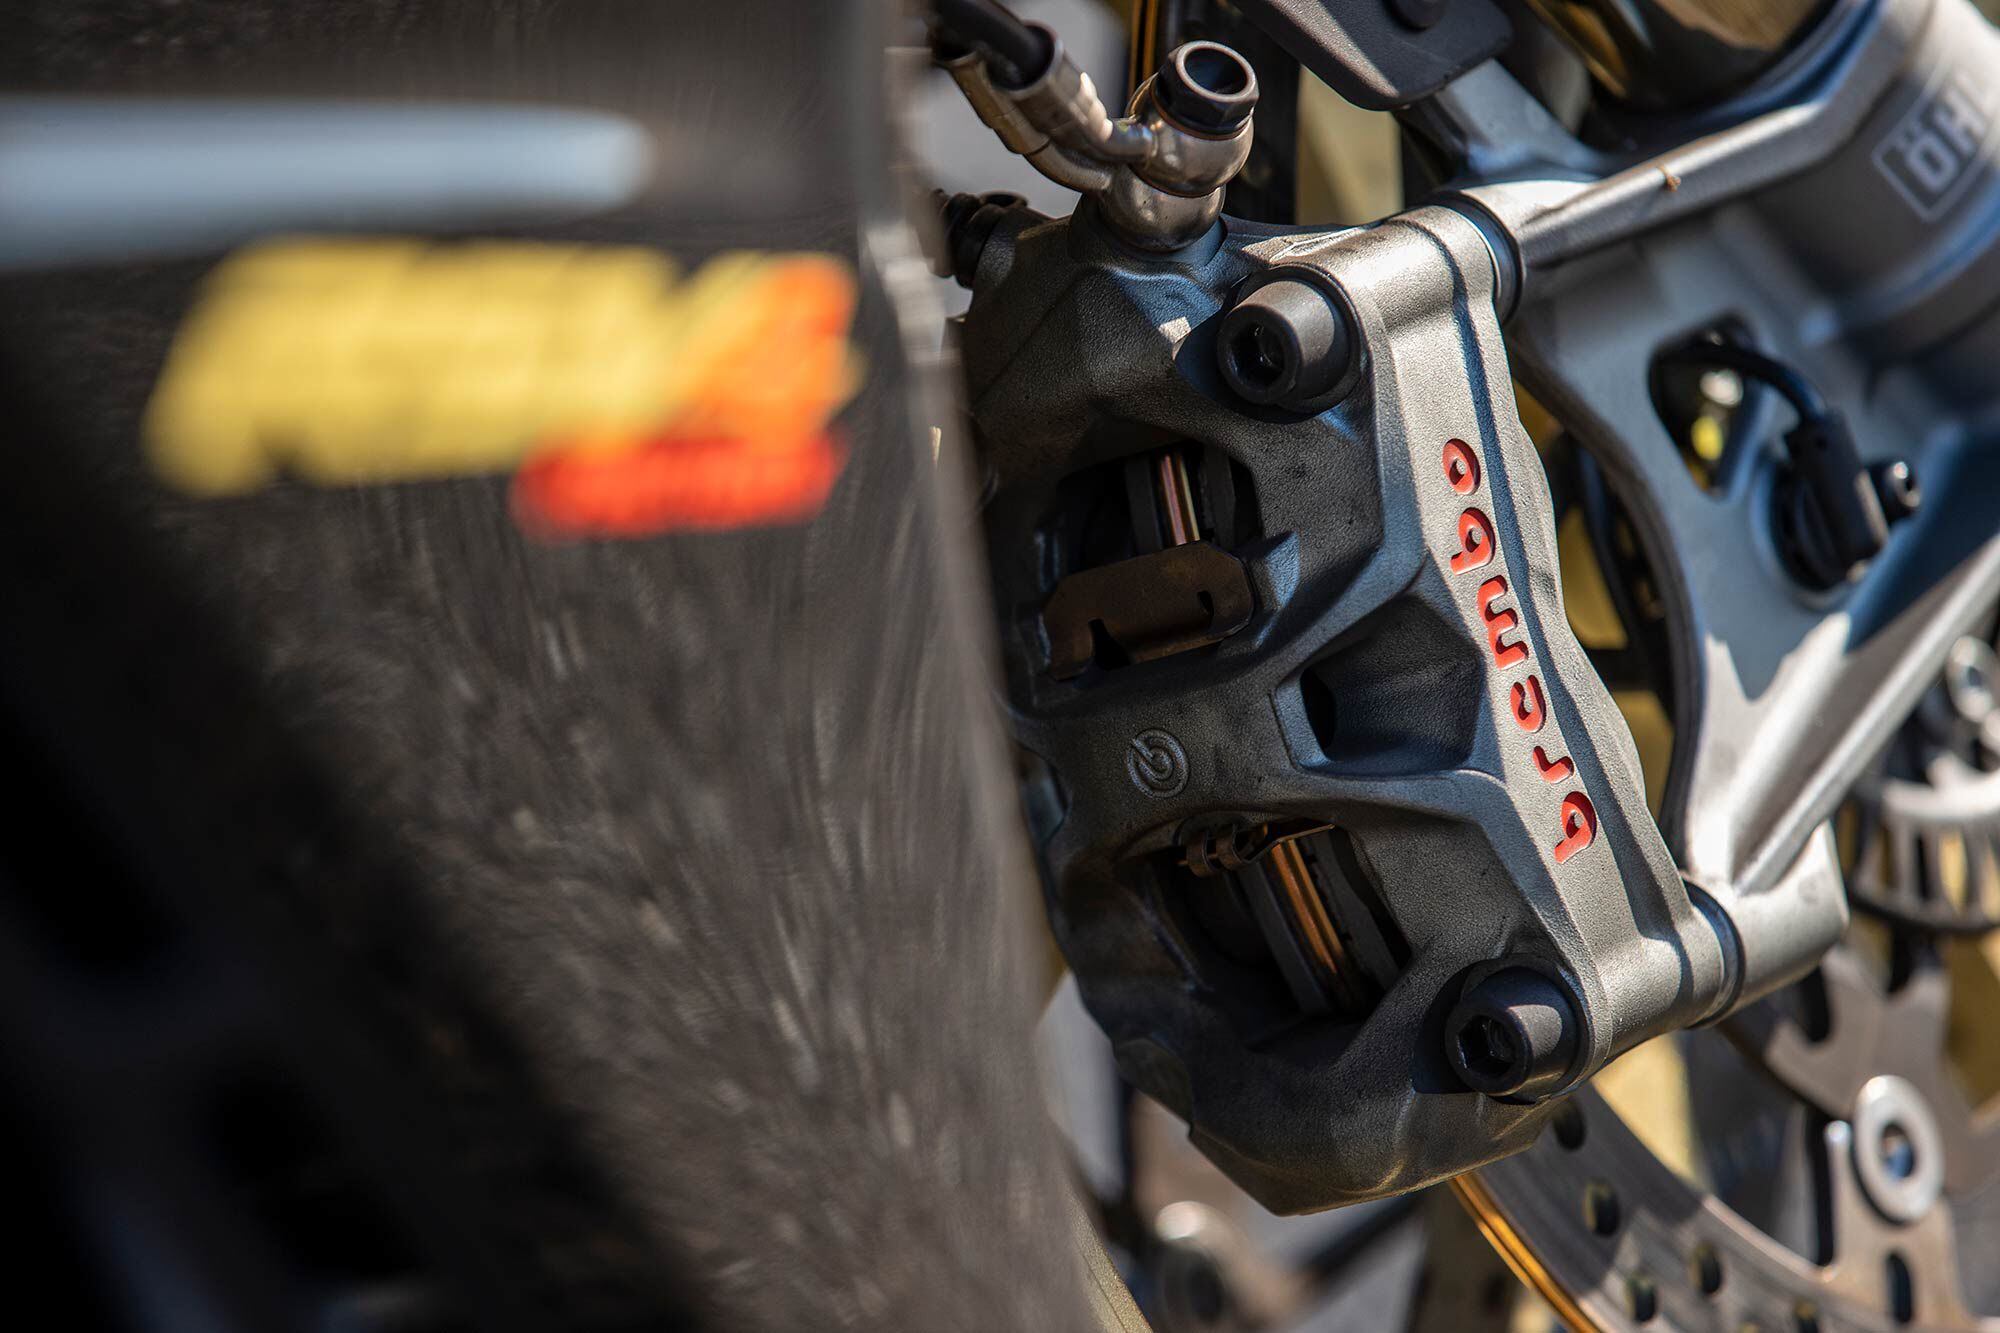 Despite being stopped by a pair of Brembo Stylema calipers, the Aprilia RSV4 Factory stops in a longer distance than the others, likely due to being the heaviest at 435 pounds empty of fuel on the <i>Cycle World</i> scales.